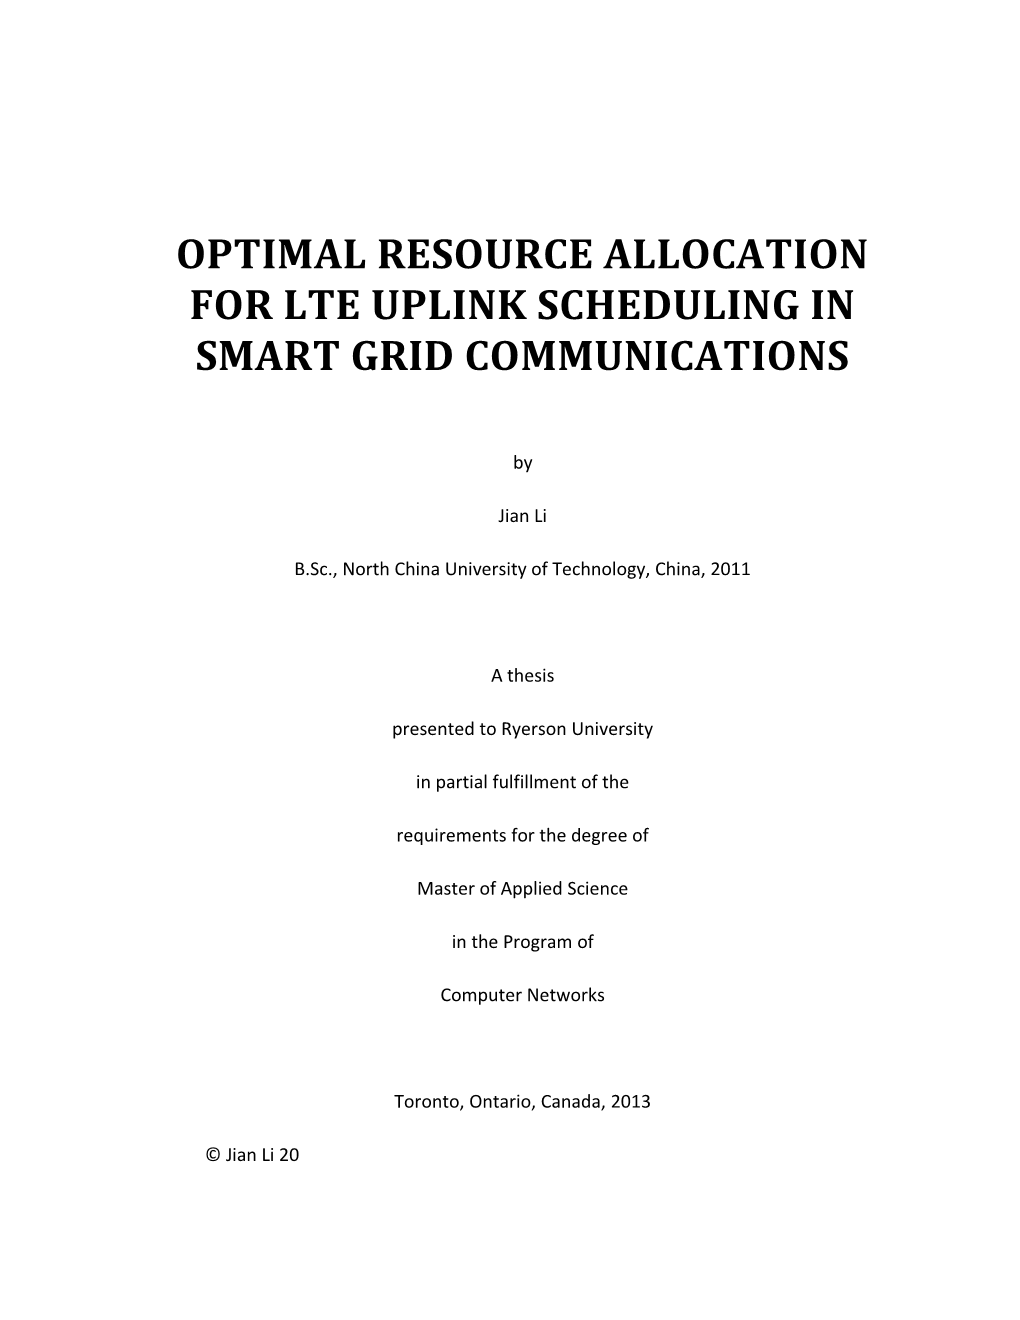 Optimal Resource Allocation for Lte Uplink Scheduling in Smart Grid Communications